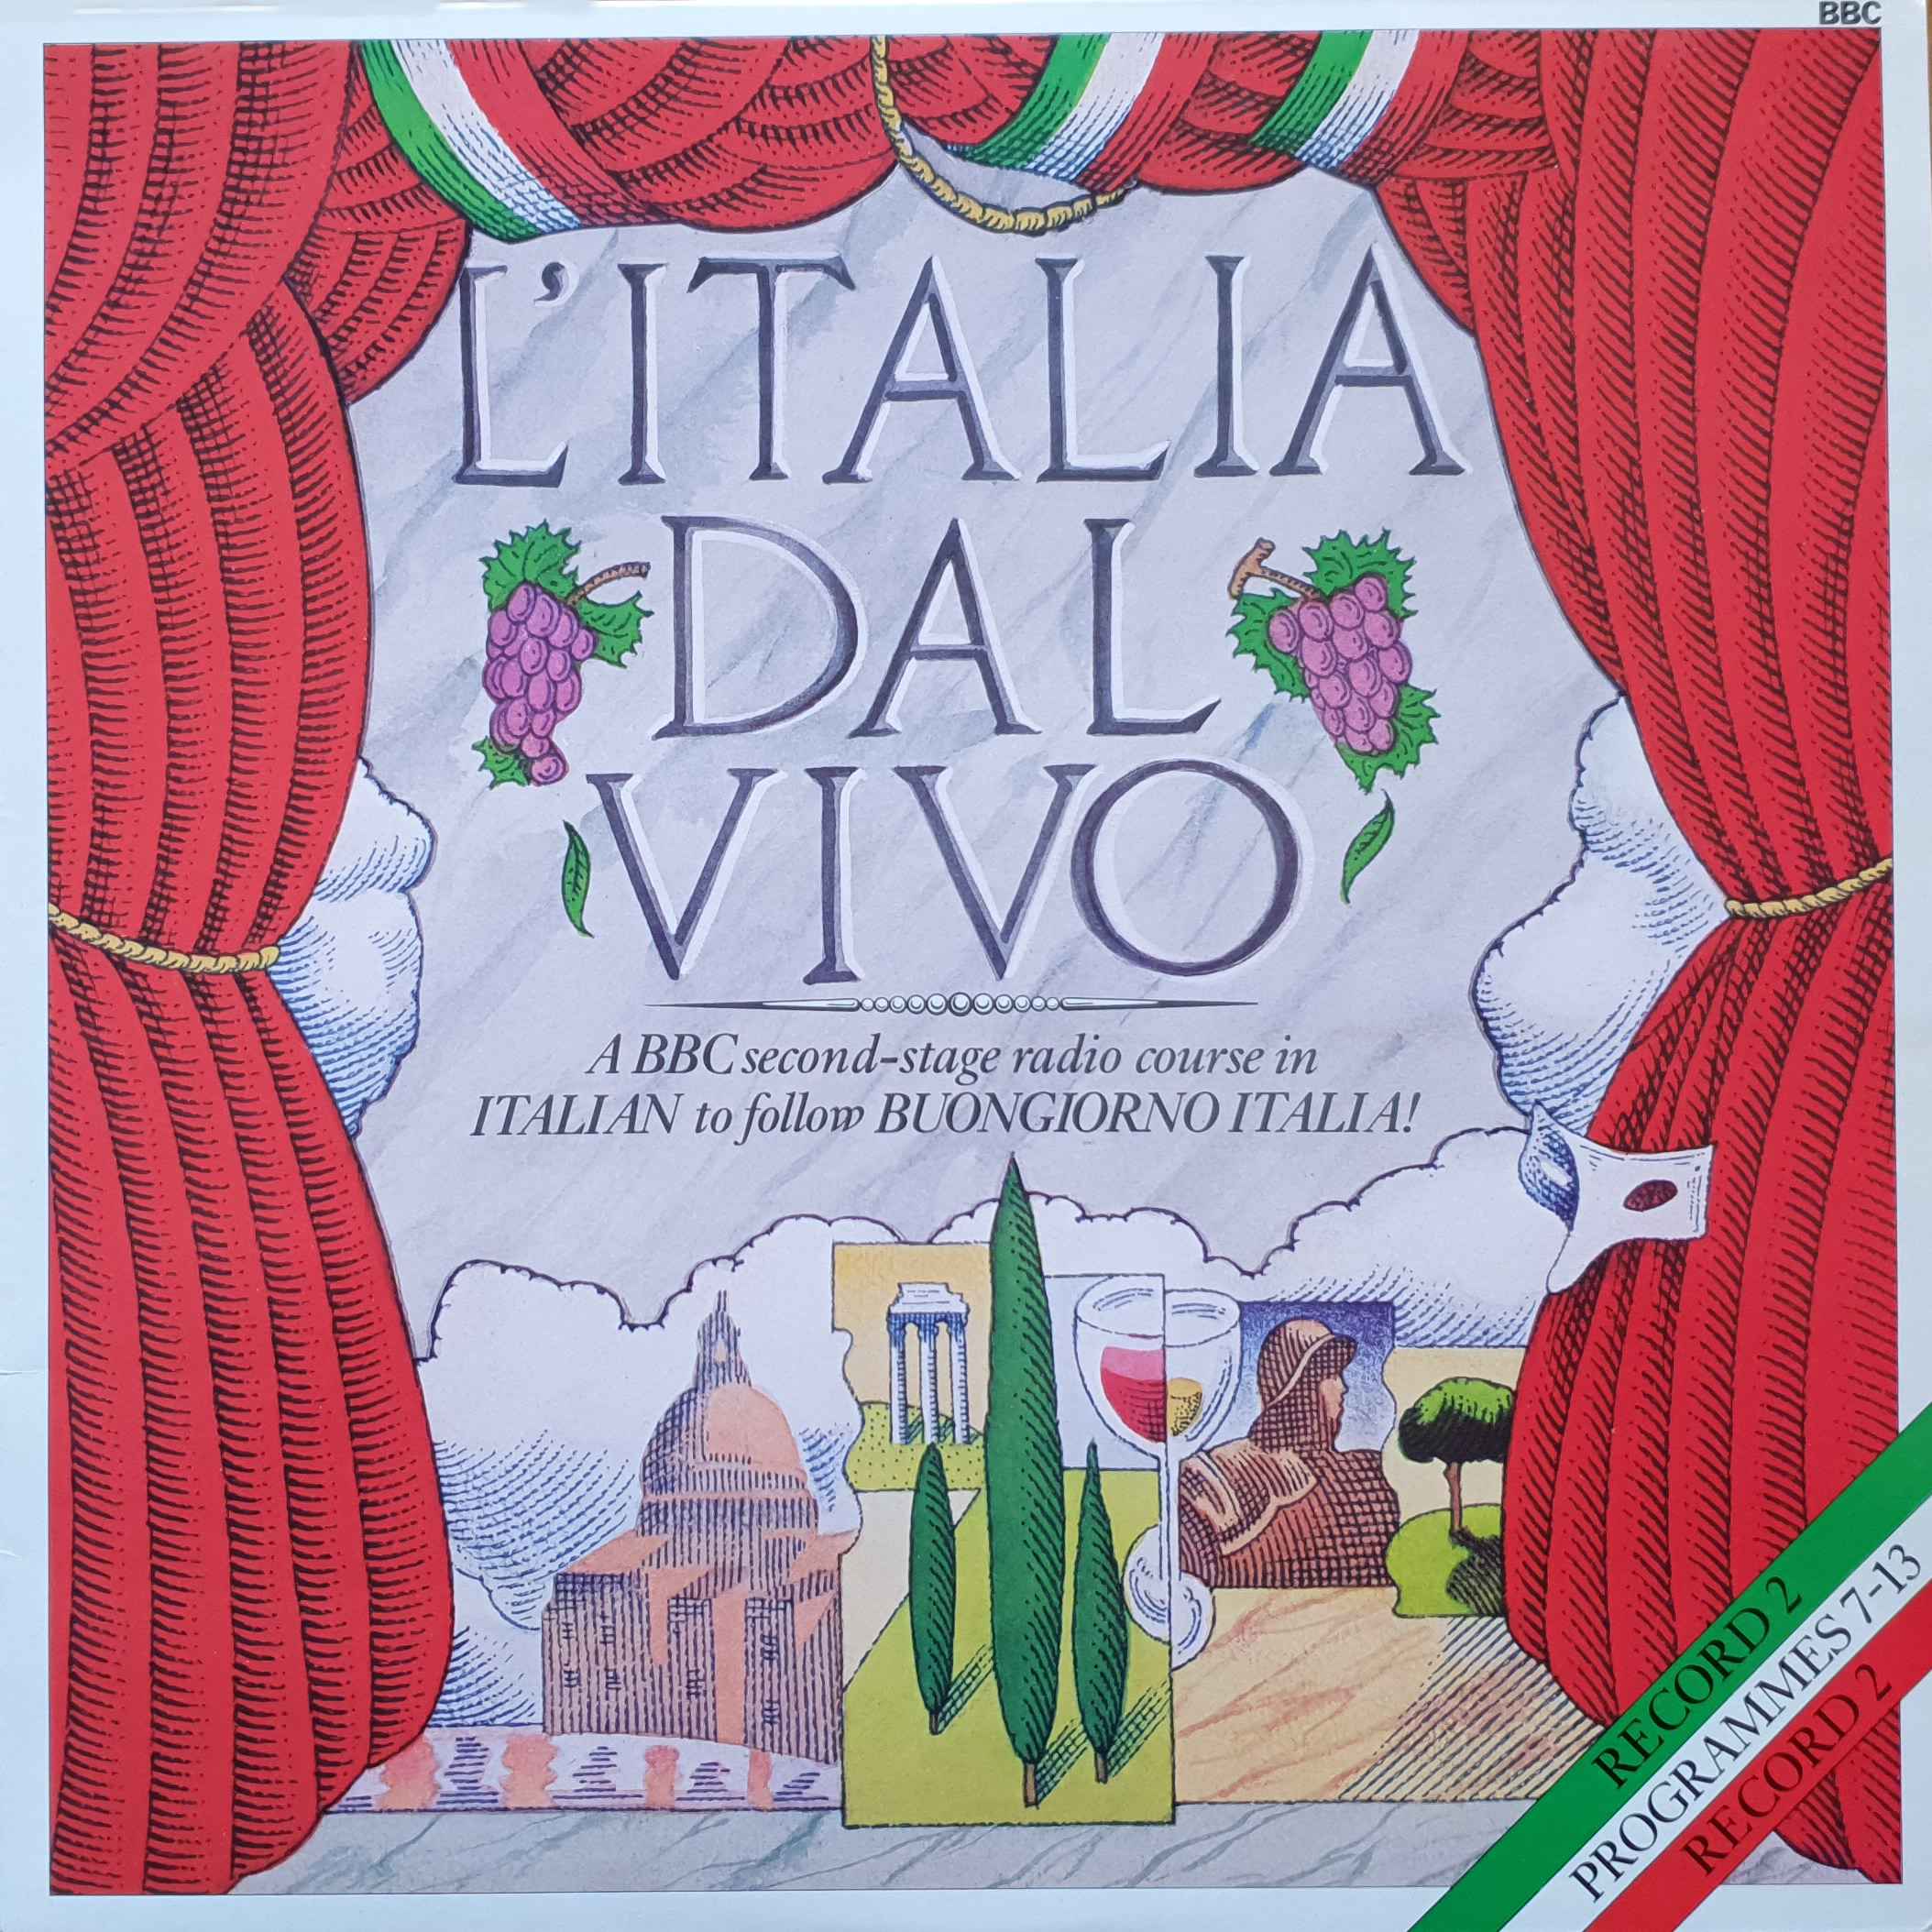 Picture of OP 267 L' Italia dal vivo - 7-13 by artist Various from the BBC albums - Records and Tapes library